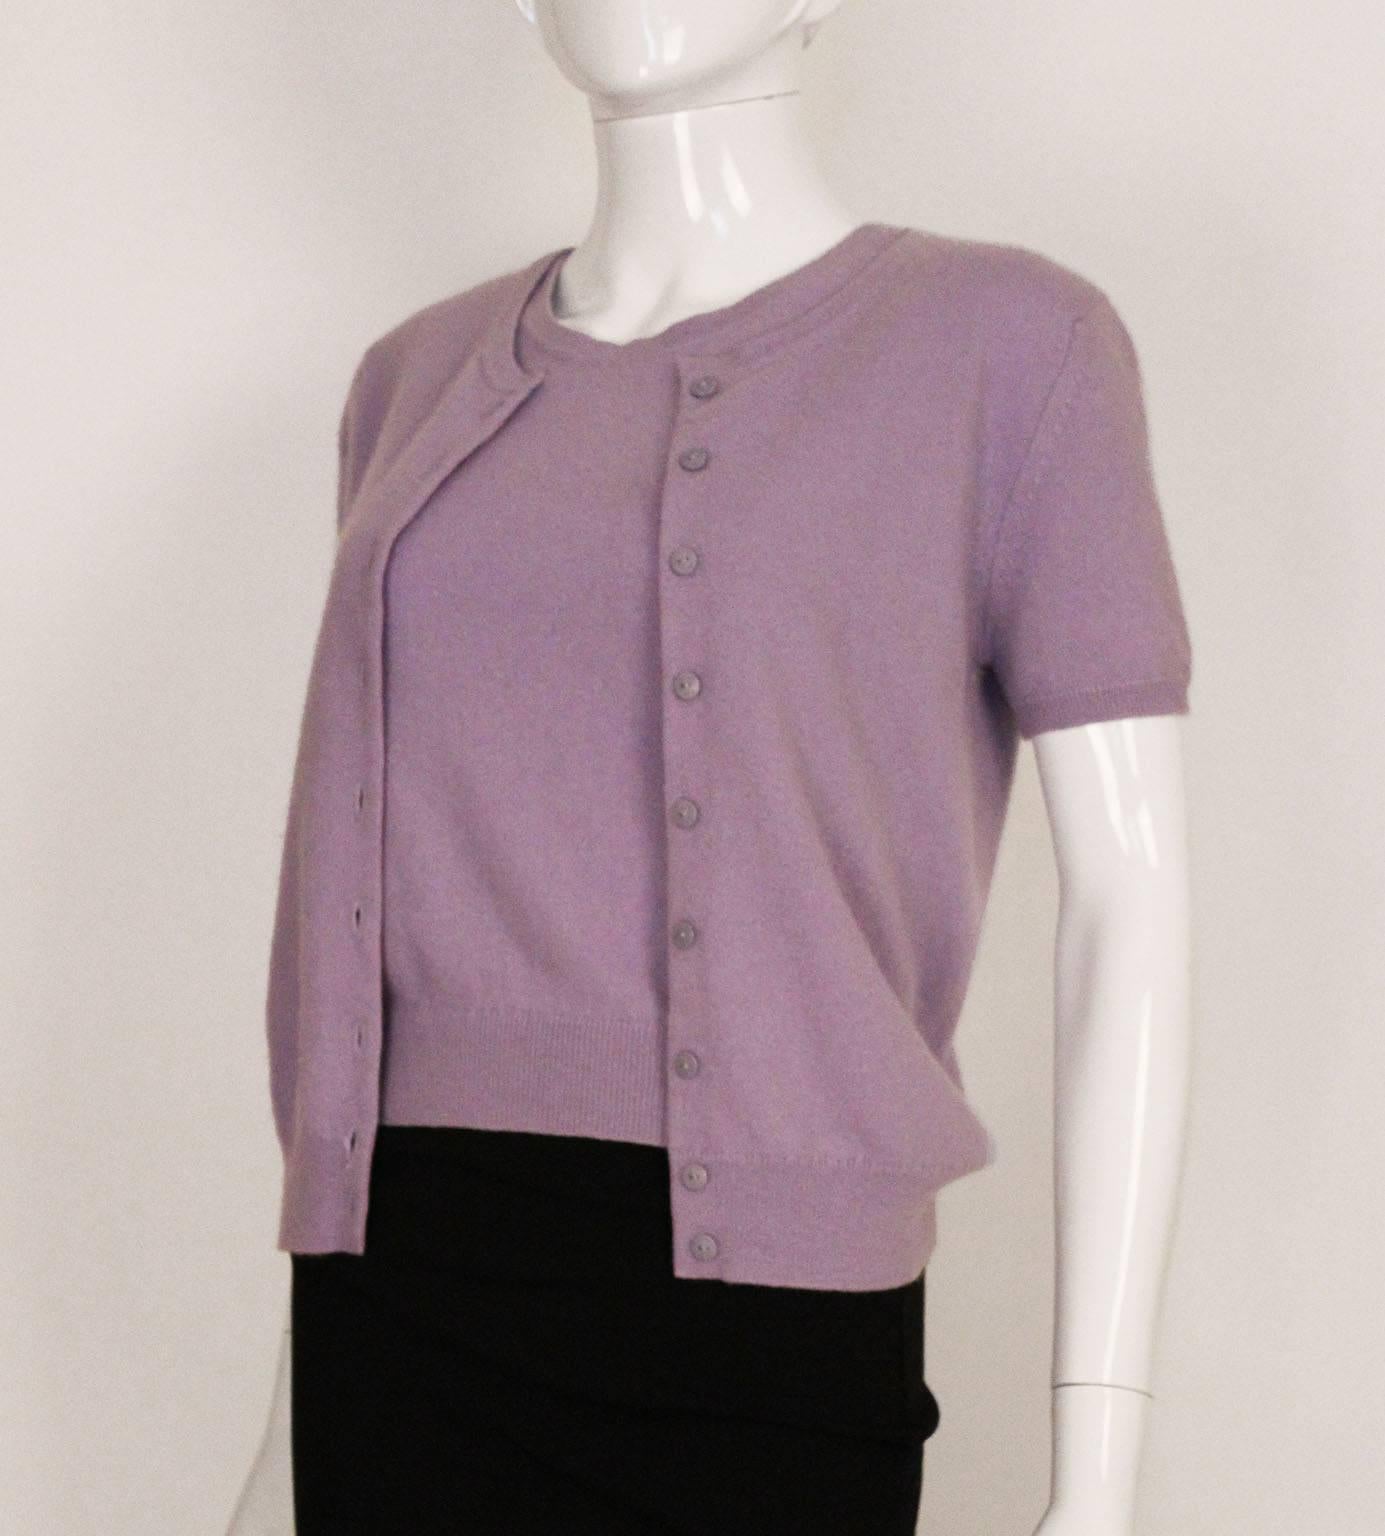 A charming and chic cashmere twinset by Chanel. In a lovely lavender colour, the twinset comprises, a shell top with round neck line, and a short sleeved cardigan with round neck .The cardigan has 9 buttons ,all stamped Chanel Paris.  Both items are